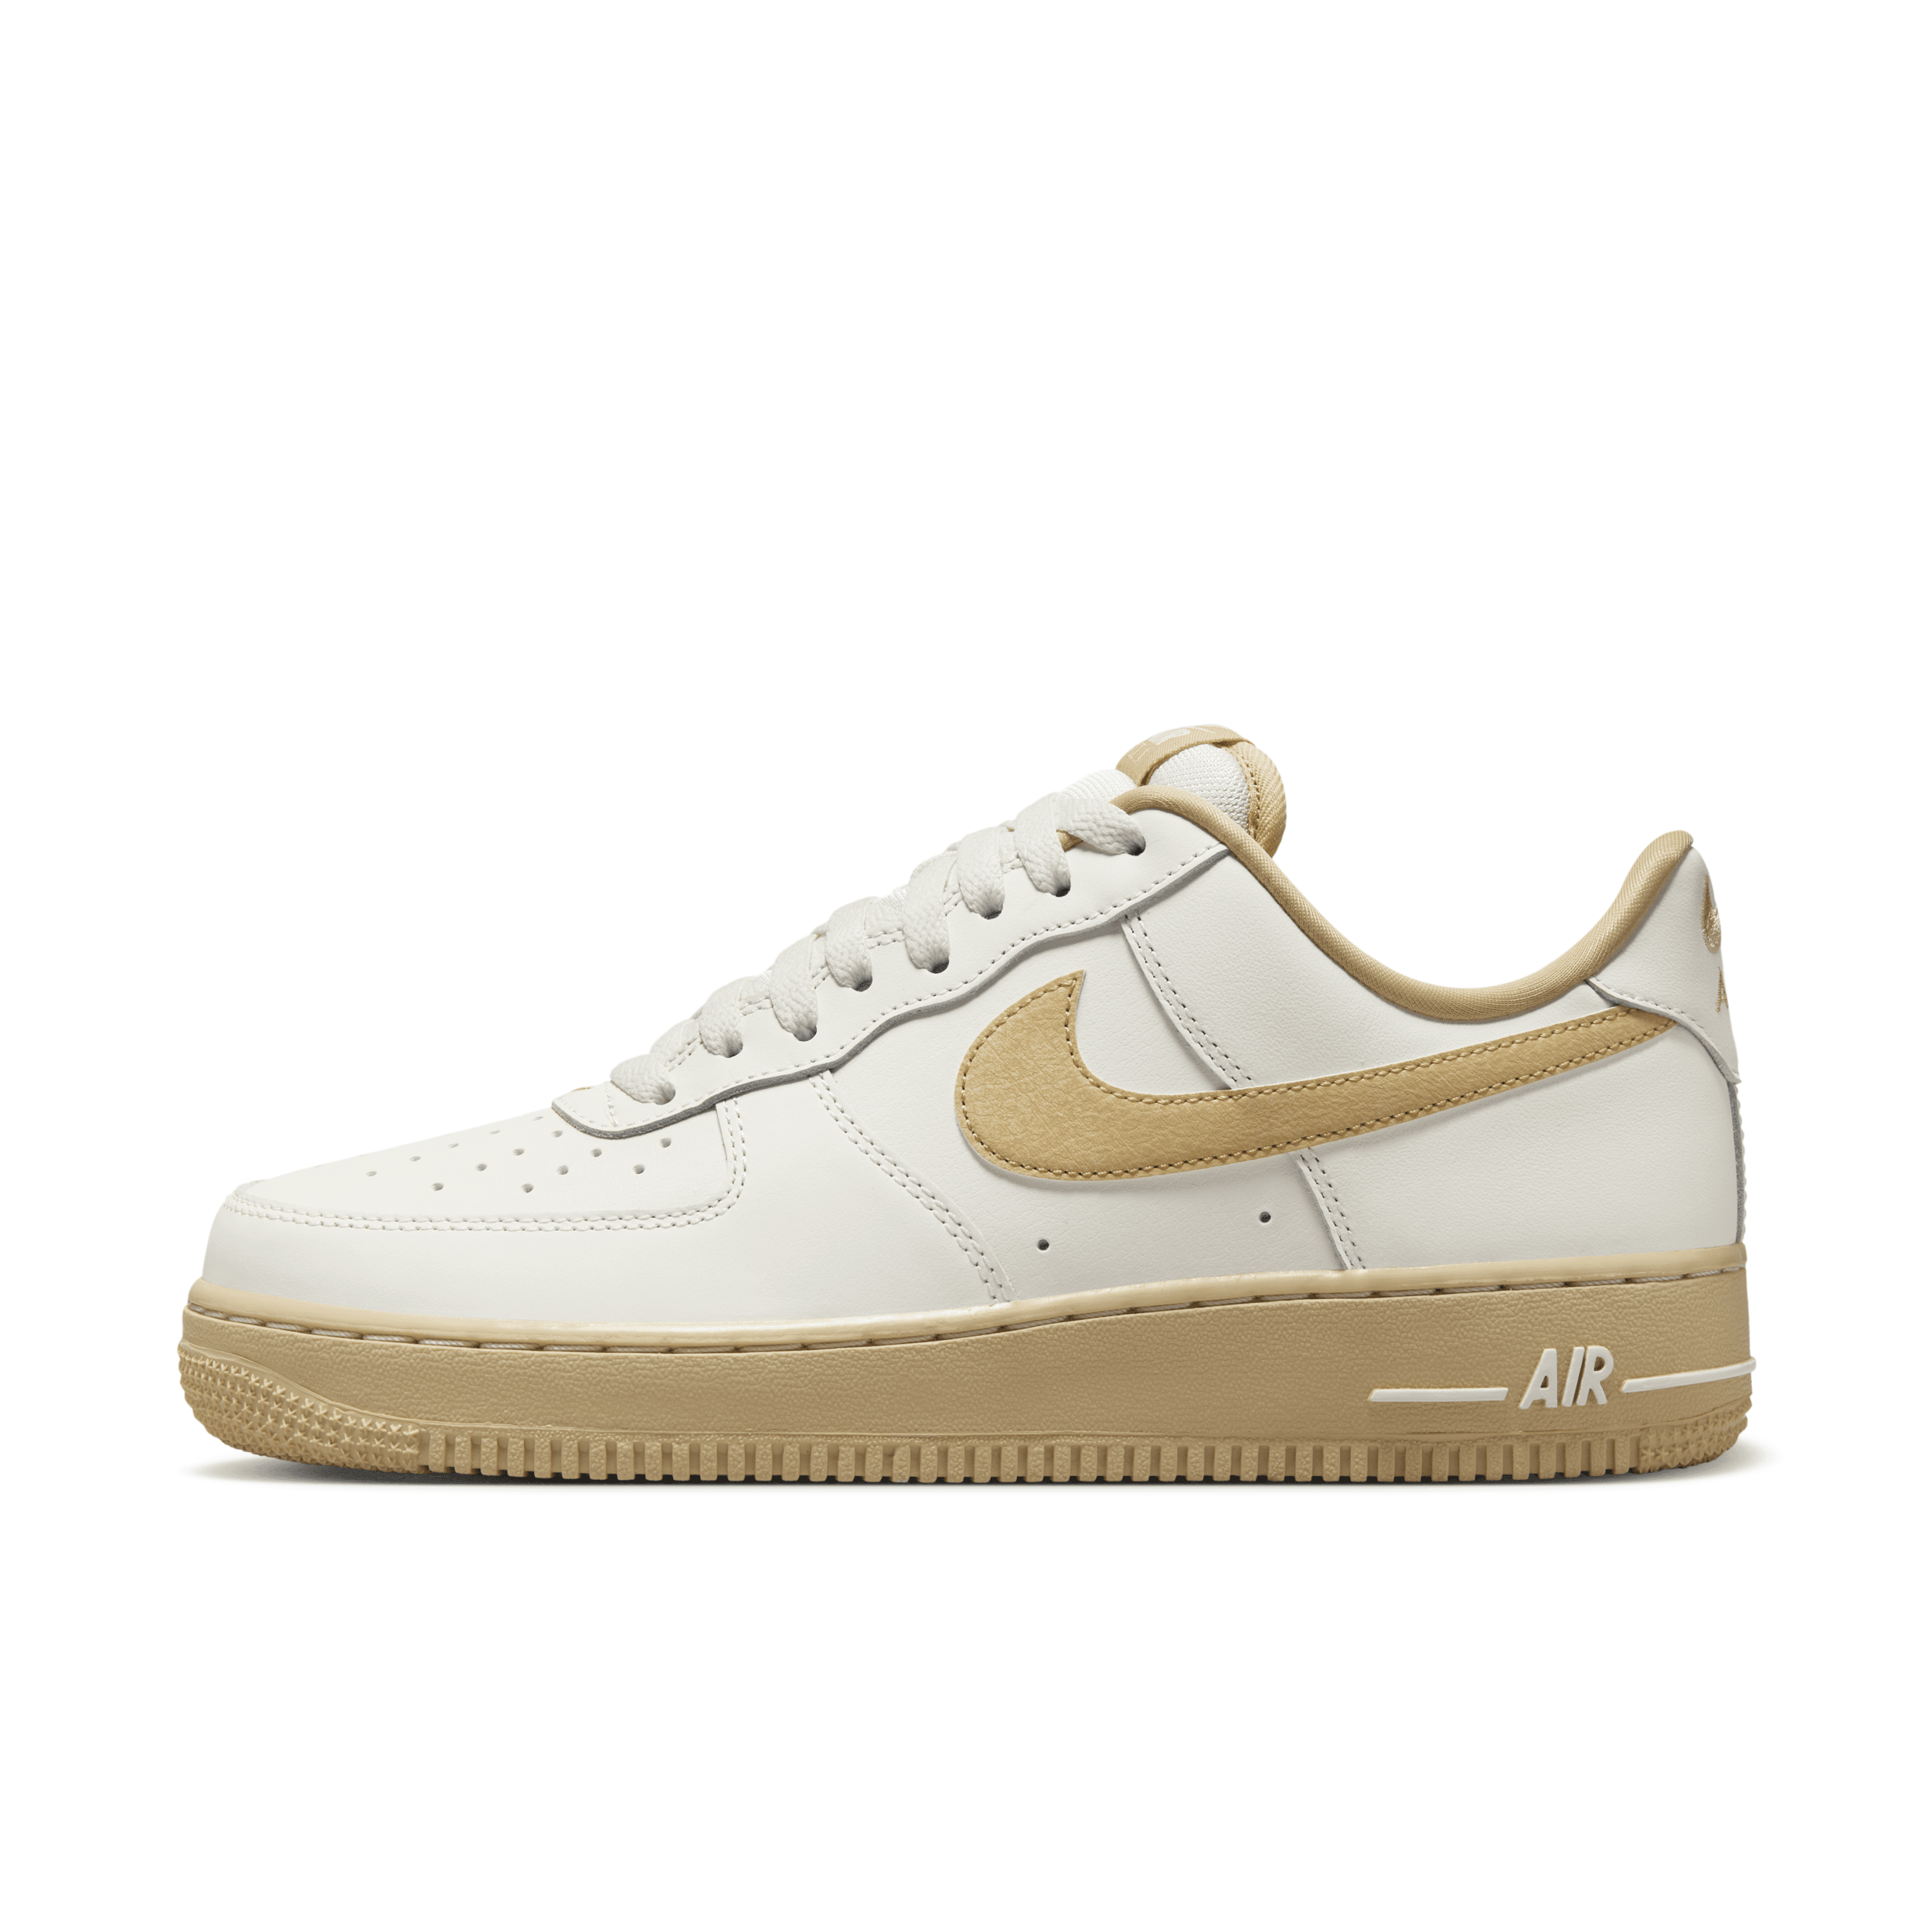 Nike Women's Air Force 1 '07 Shoes in White, Size: 6.5 | FZ3597-133